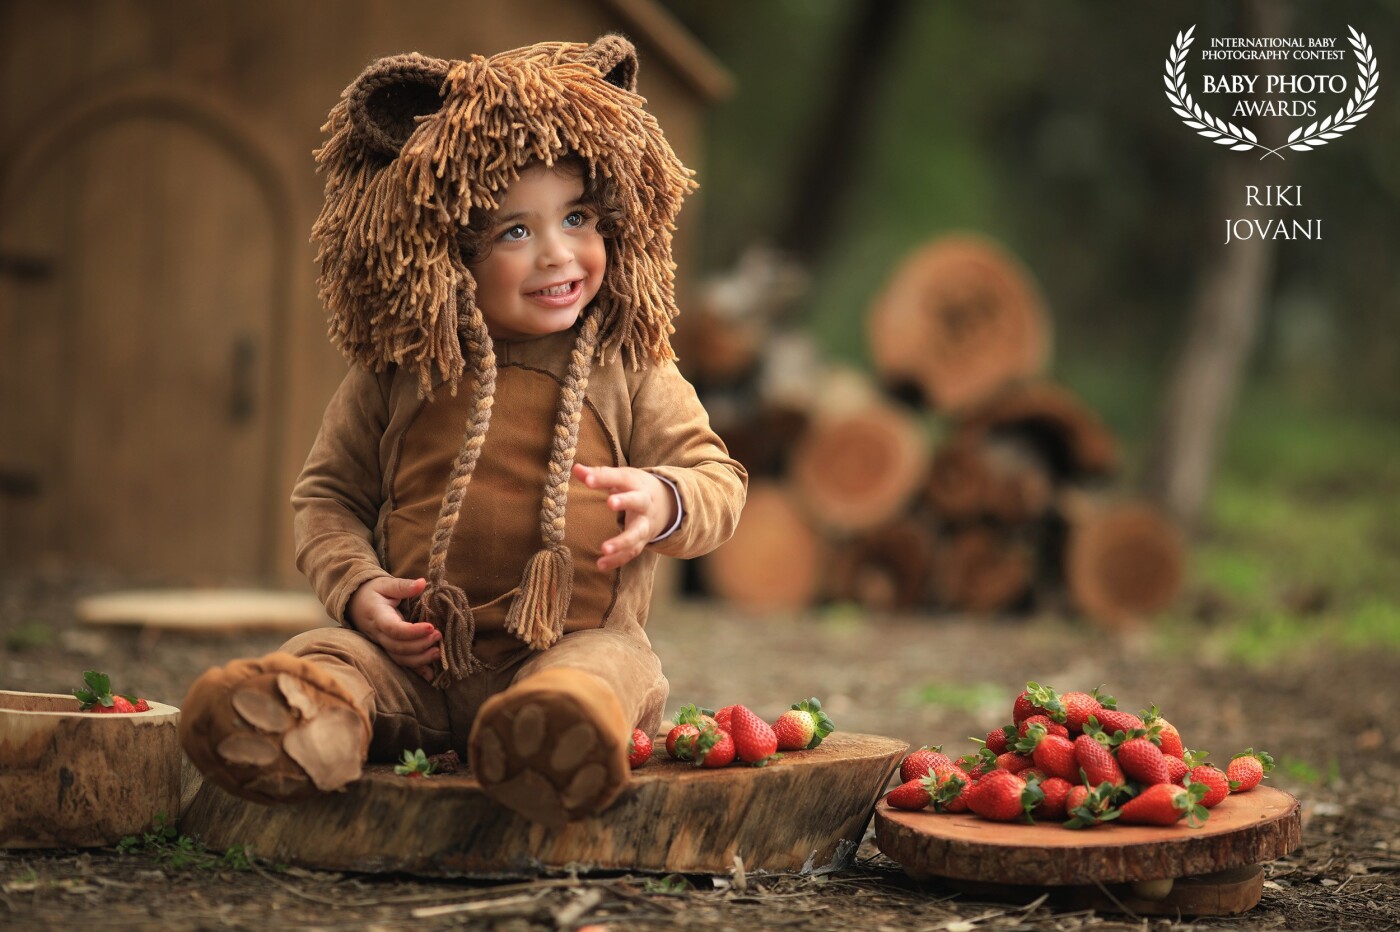 My sweet little boy favorite Book is "The lion that loves strawberry" (popular children's book in Israel)<br />
He enjoyed the idea, by acting the character and he loves strawberry so much. He didn't believe that he could eat so many of them.